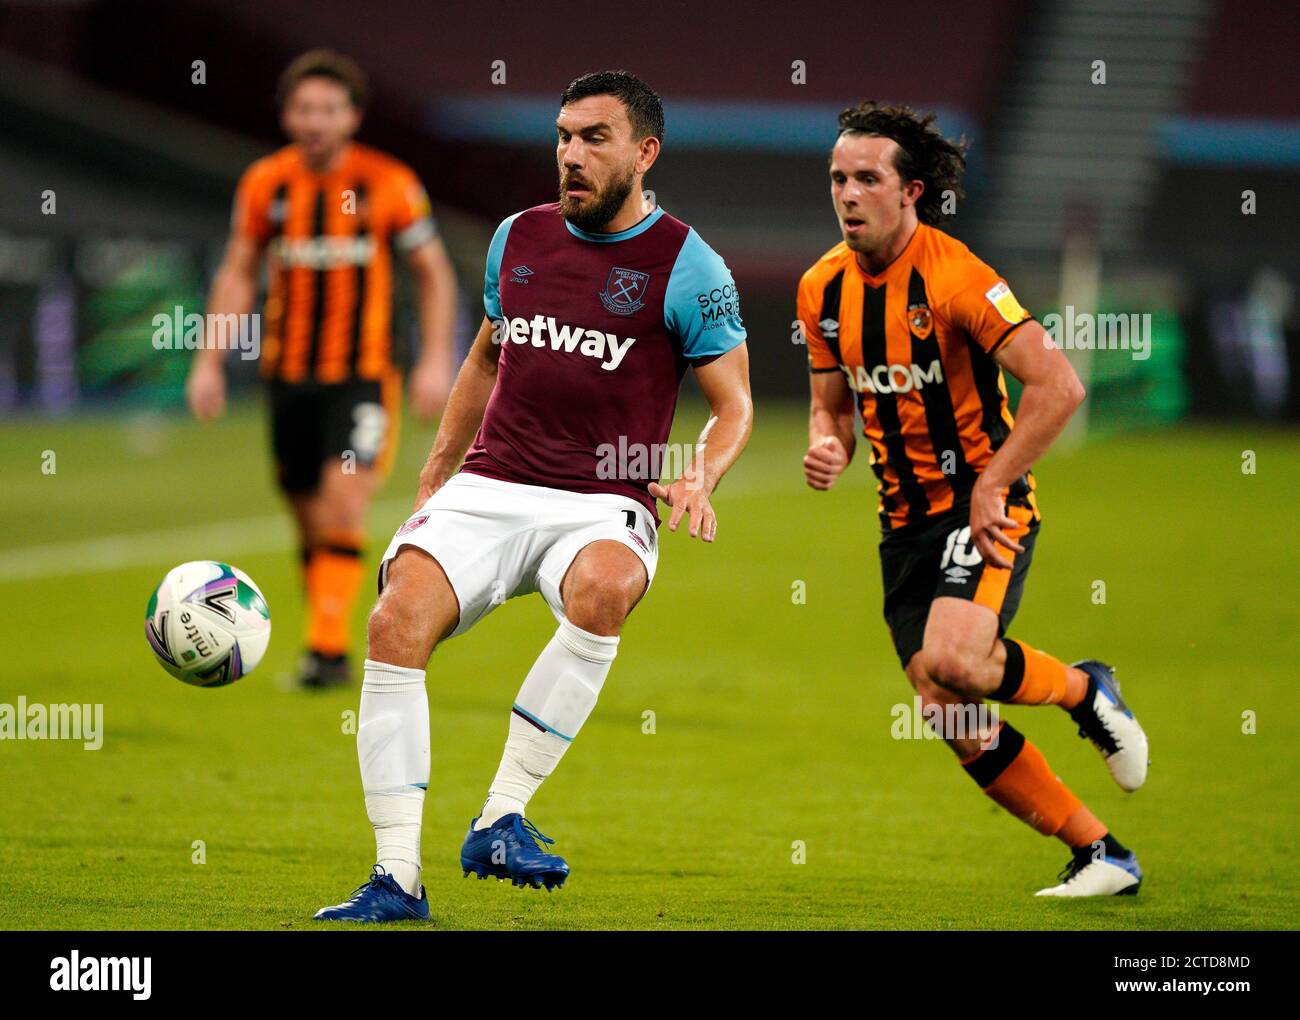 West Ham United's Robert Snodgrass (left) and Hull City's George Honeyman battle for the ball during the Carabao Cup third round match at the London Stadium. Stock Photo